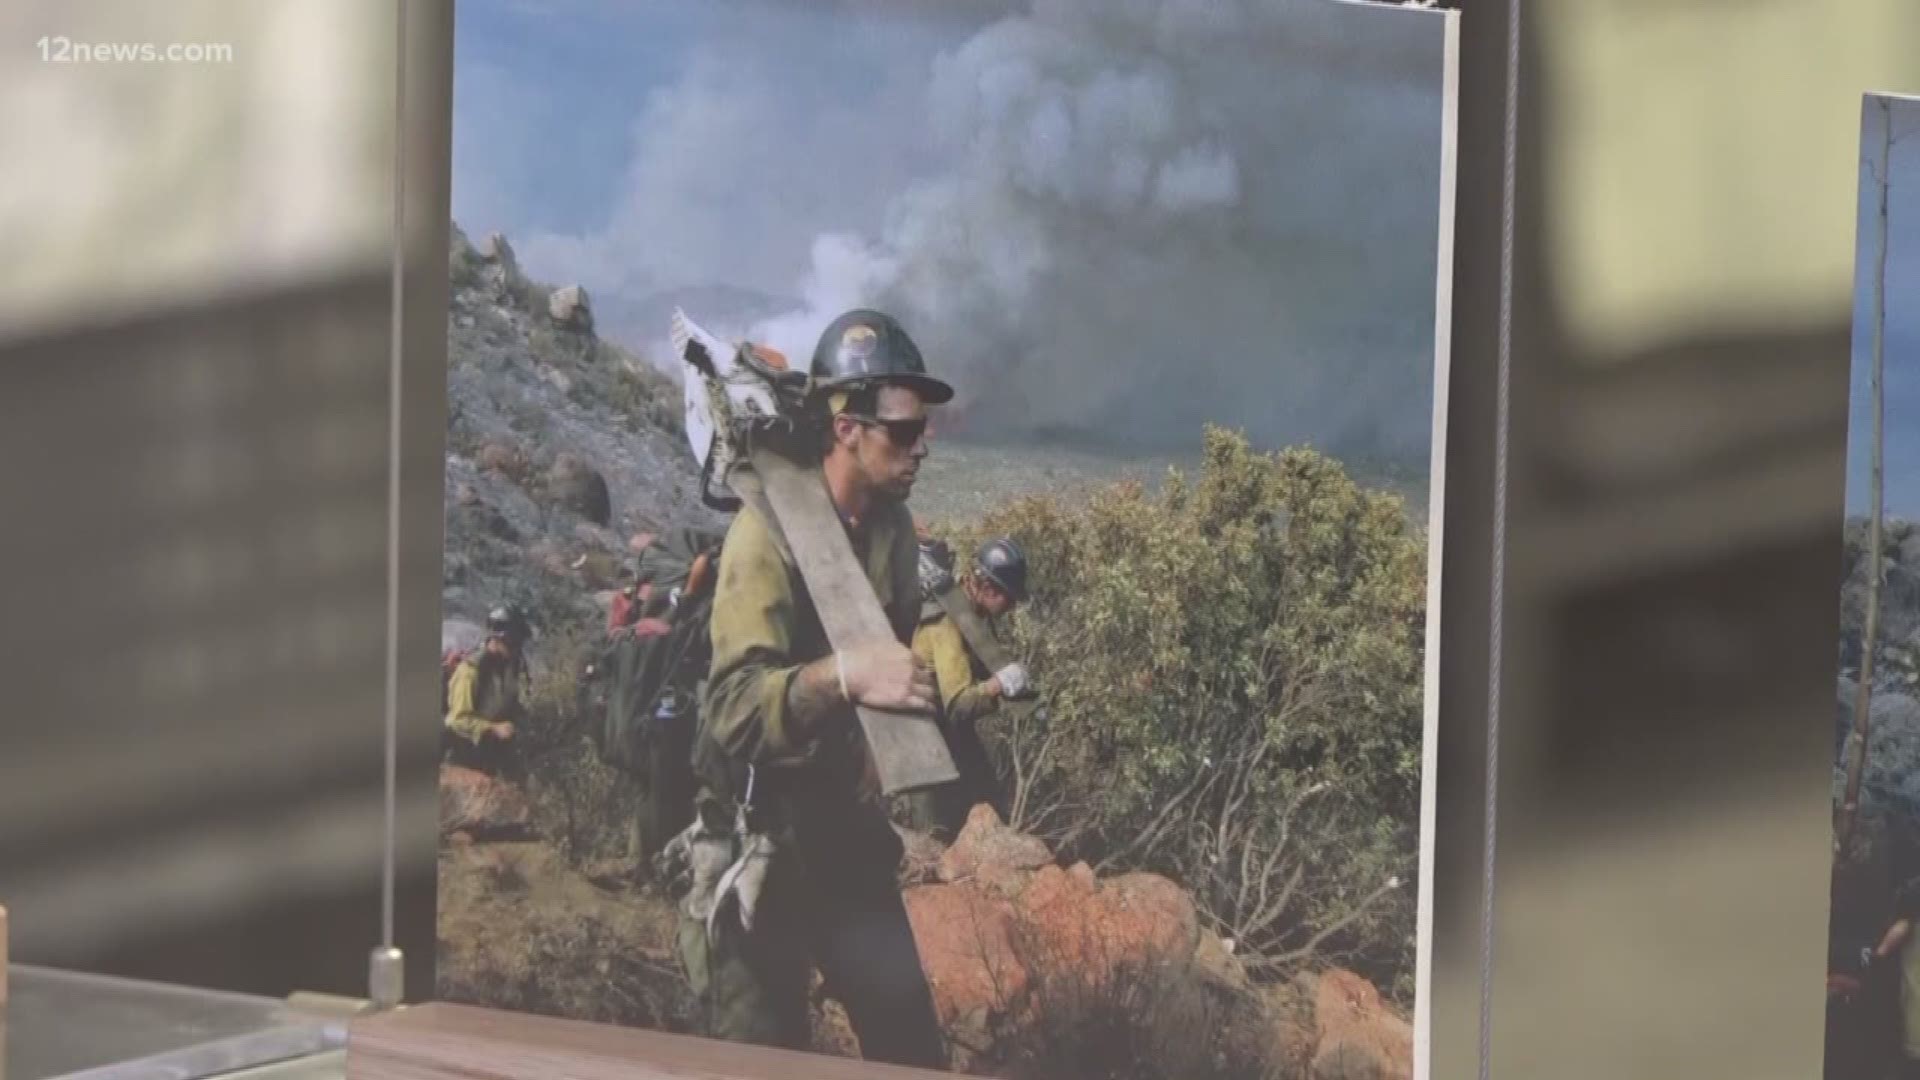 A new center opens to the public that is dedicated to the 19 hotshots who died in the Yarnell Hill wildfire, but also aims to educate people about wildfire safety.